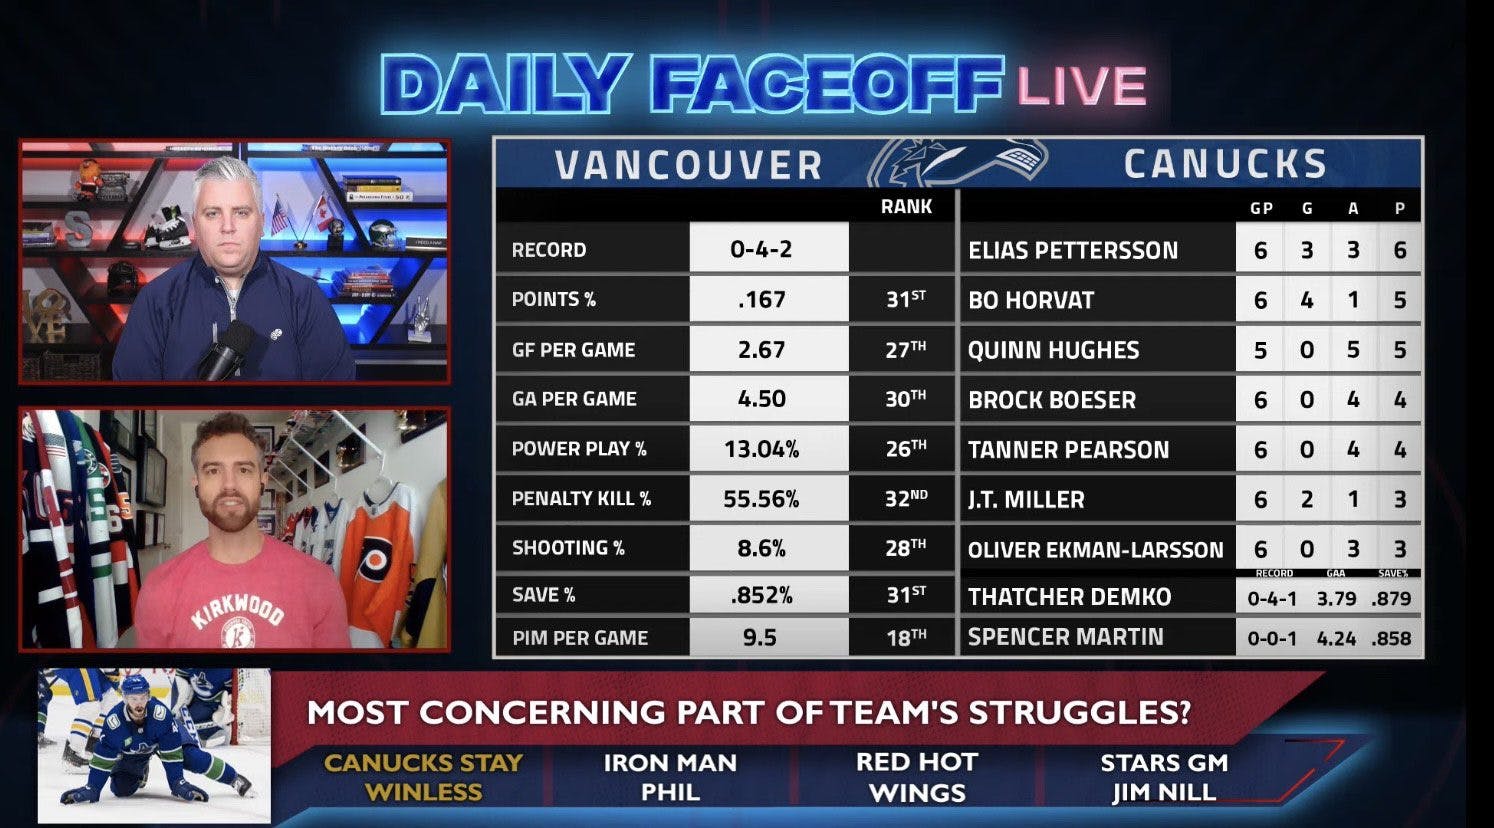 Daily Faceoff Live: Can the Canucks overcome their struggles?